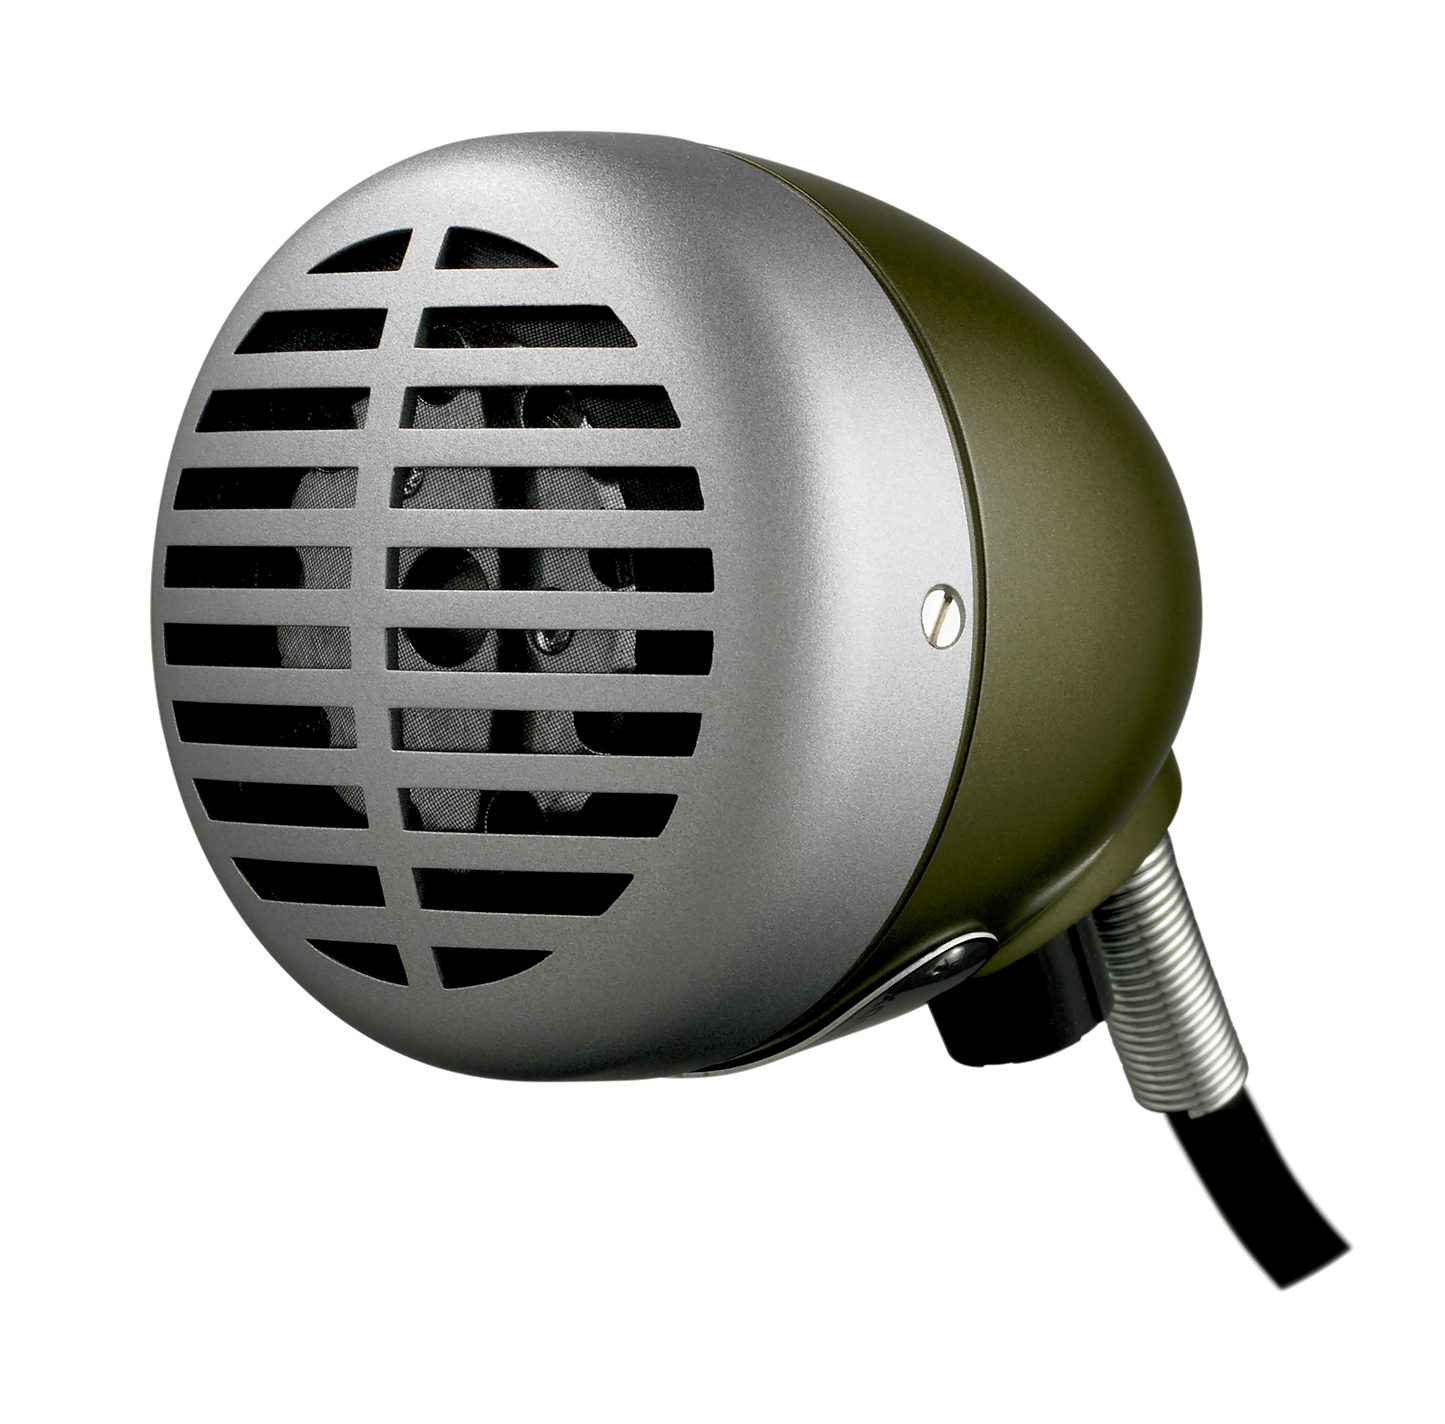 Shure 520DX “The Green Bullet” Omnidirectional Dynamic